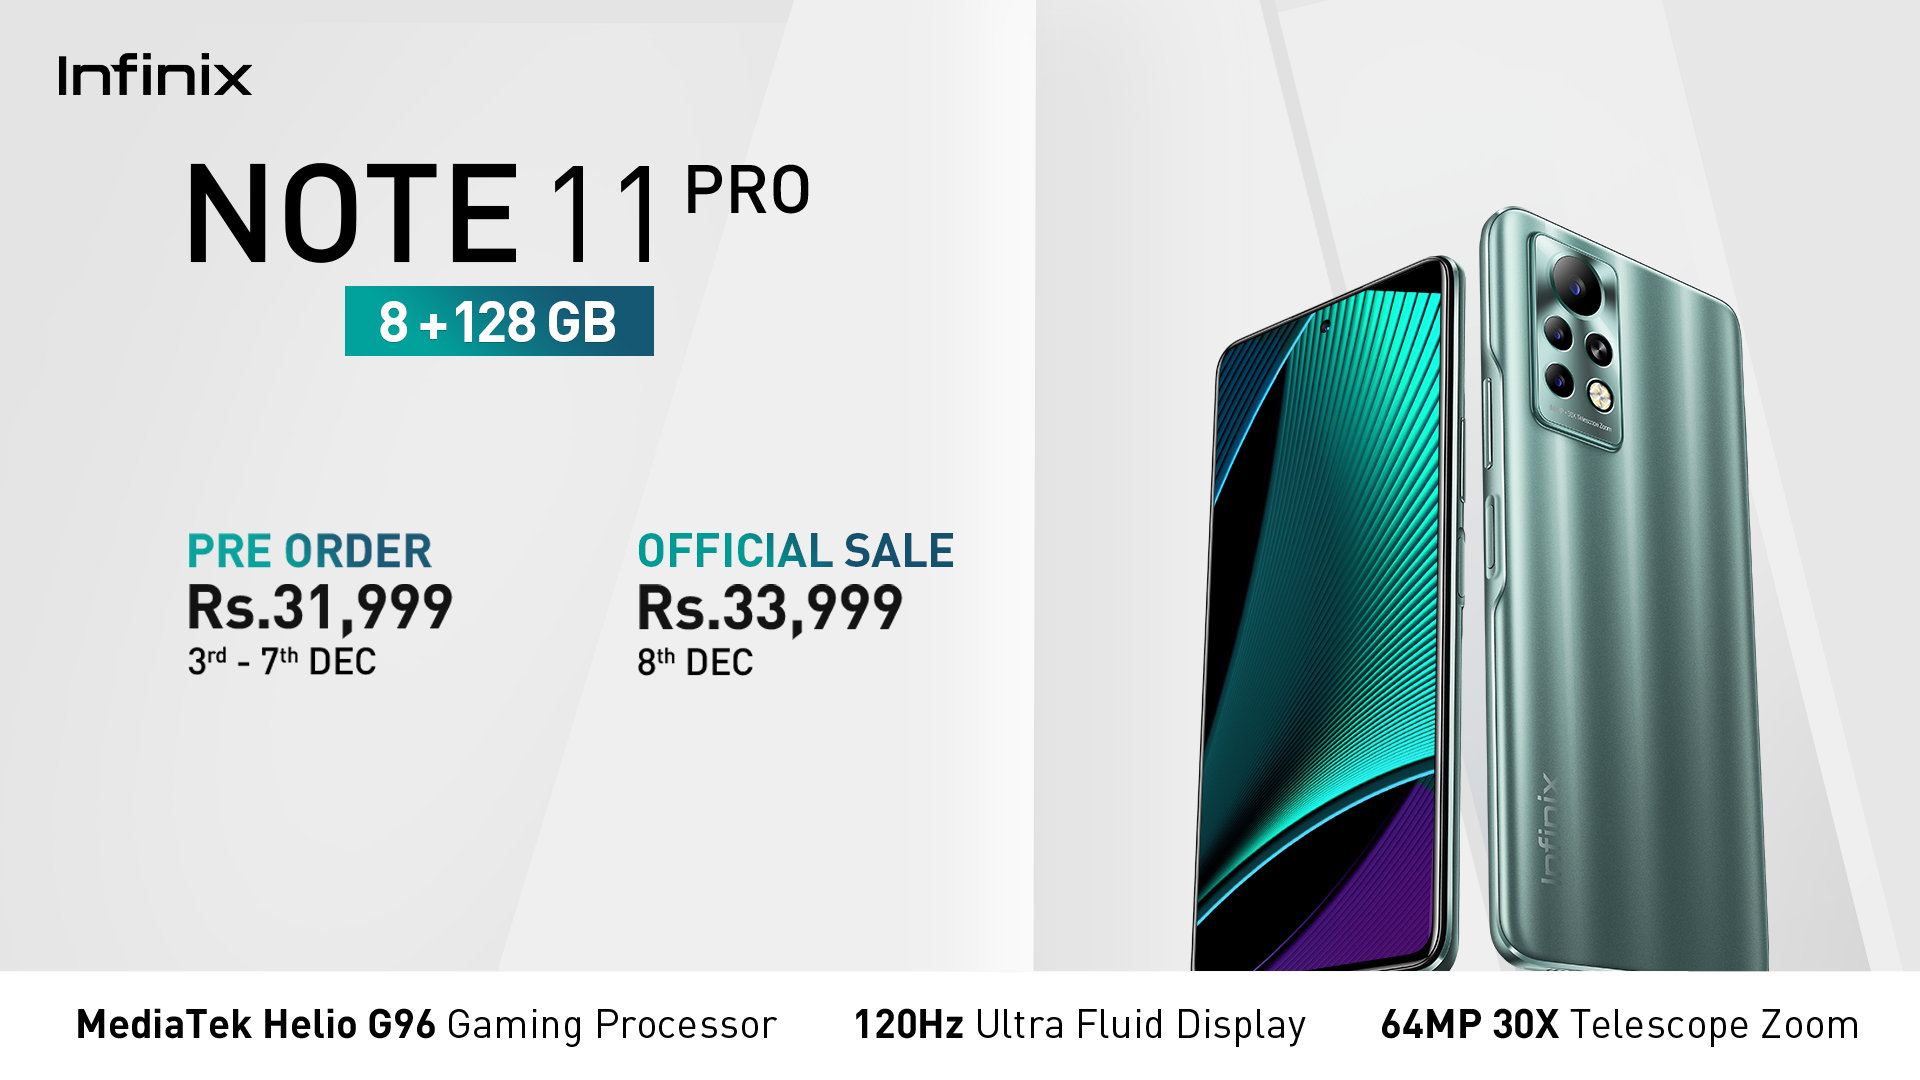 Redefining performance and speed, Infinix to bring NOTE 11 Pro with MediaTek Helio G96 Speed Up